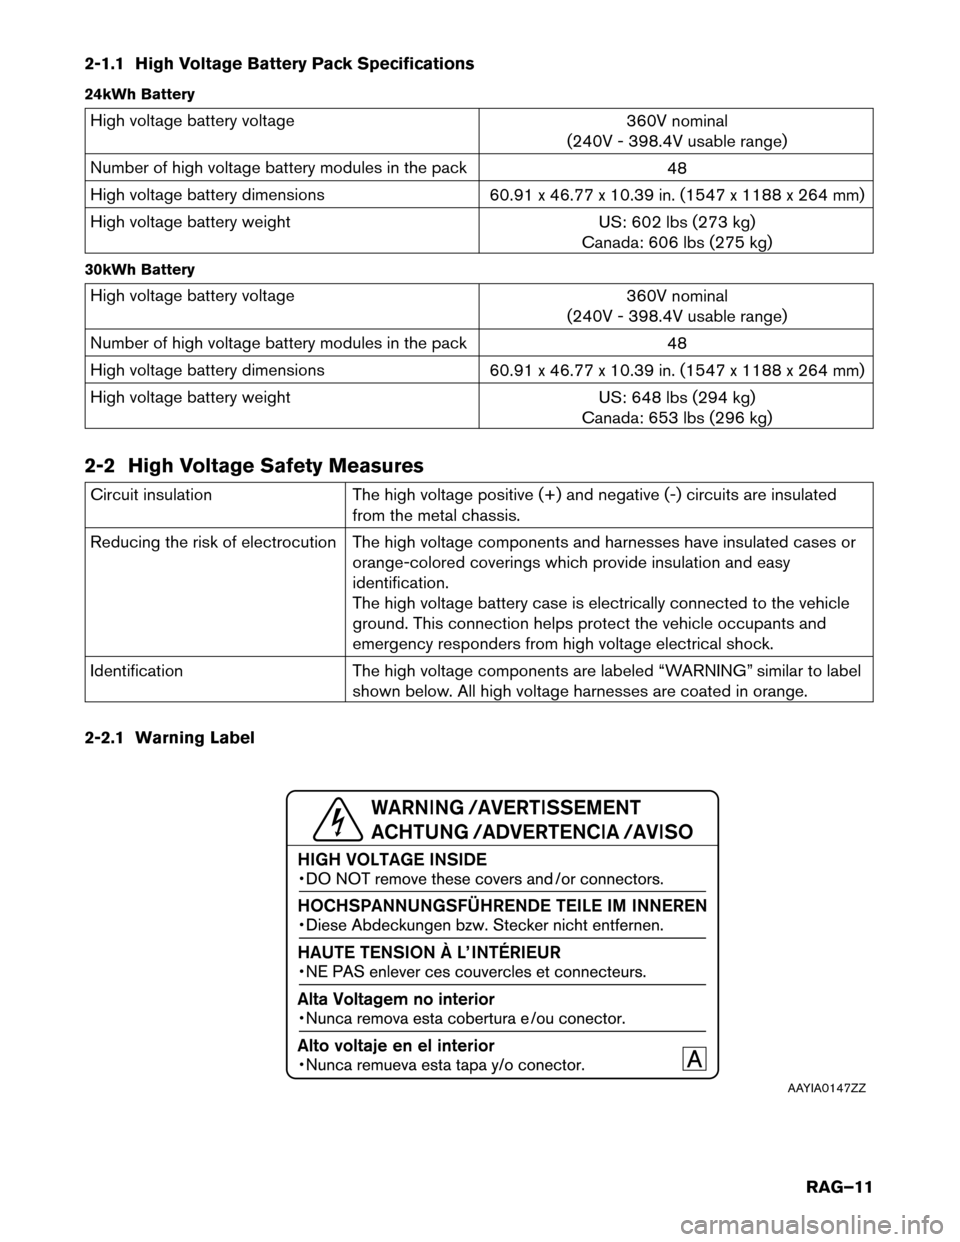 NISSAN LEAF 2016 1.G Roadside Assistance Guide 2-1.1 High Voltage Battery Pack Specifications
24kWh
Battery High voltage battery voltage
360V
 nominal
(240V - 398.4V usable range)
Number of high voltage battery modules in the pack 48
High voltage 